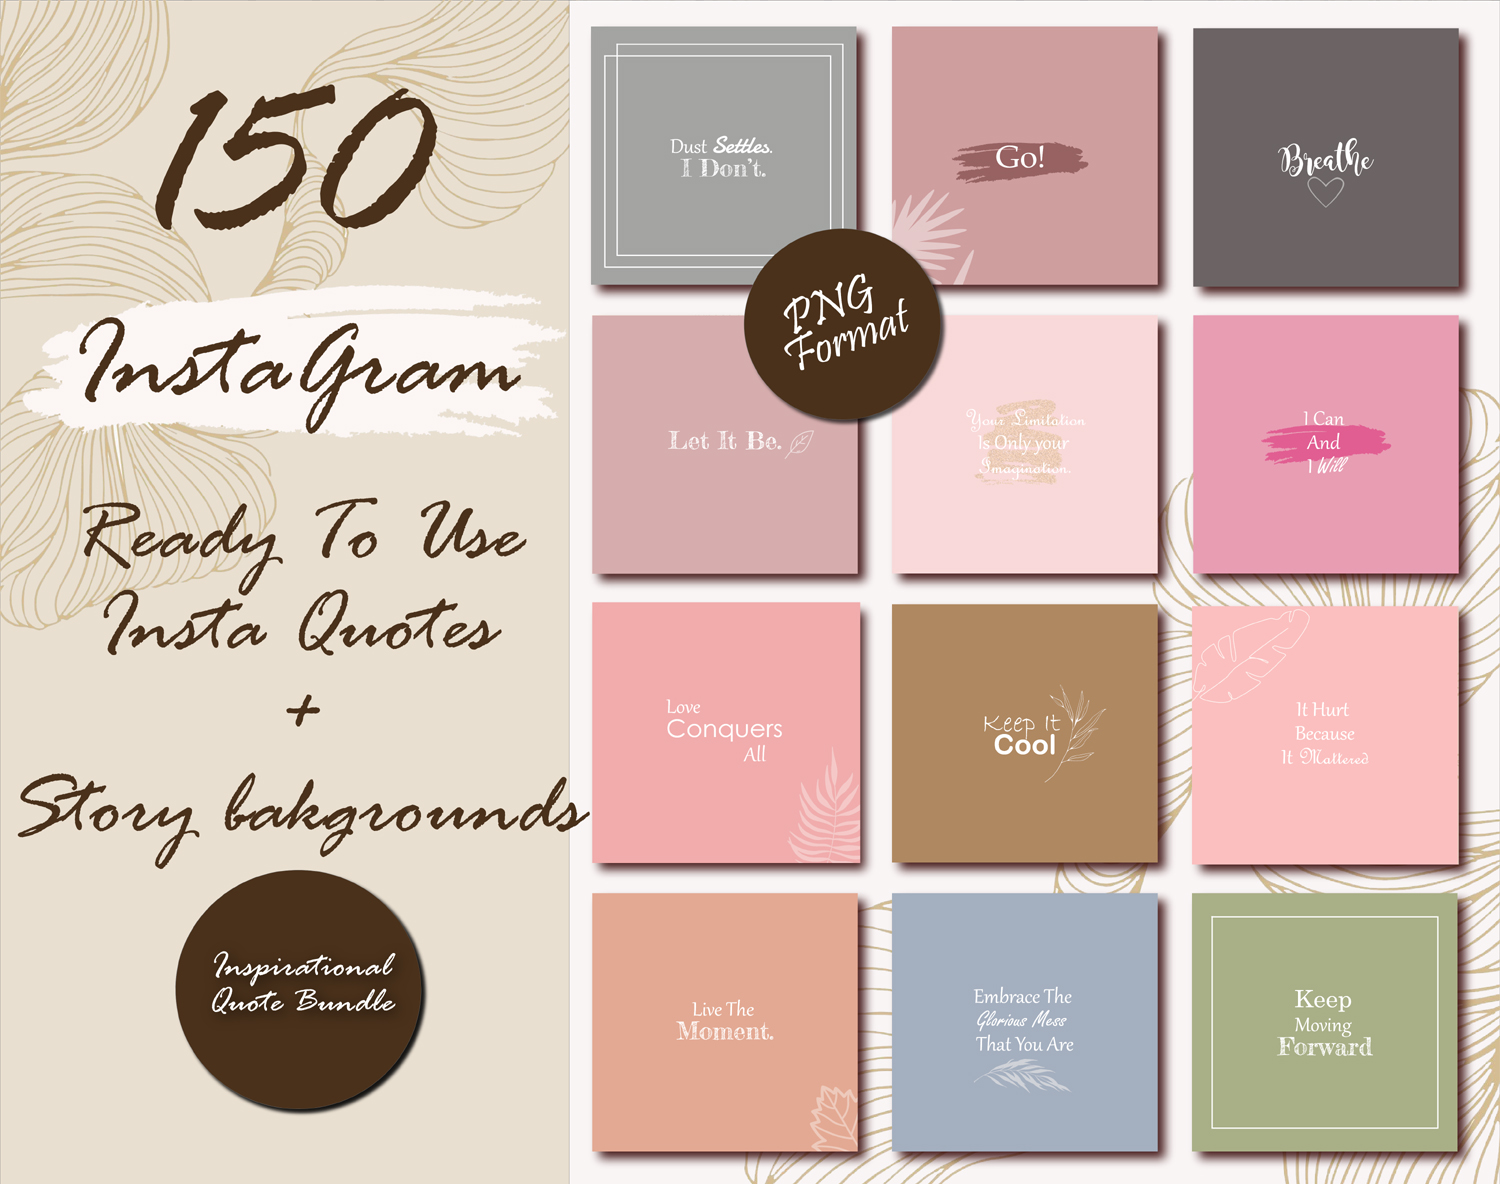 150 Ready To Use Motivational Quotes + story backgrounds, Neutral boho Colors